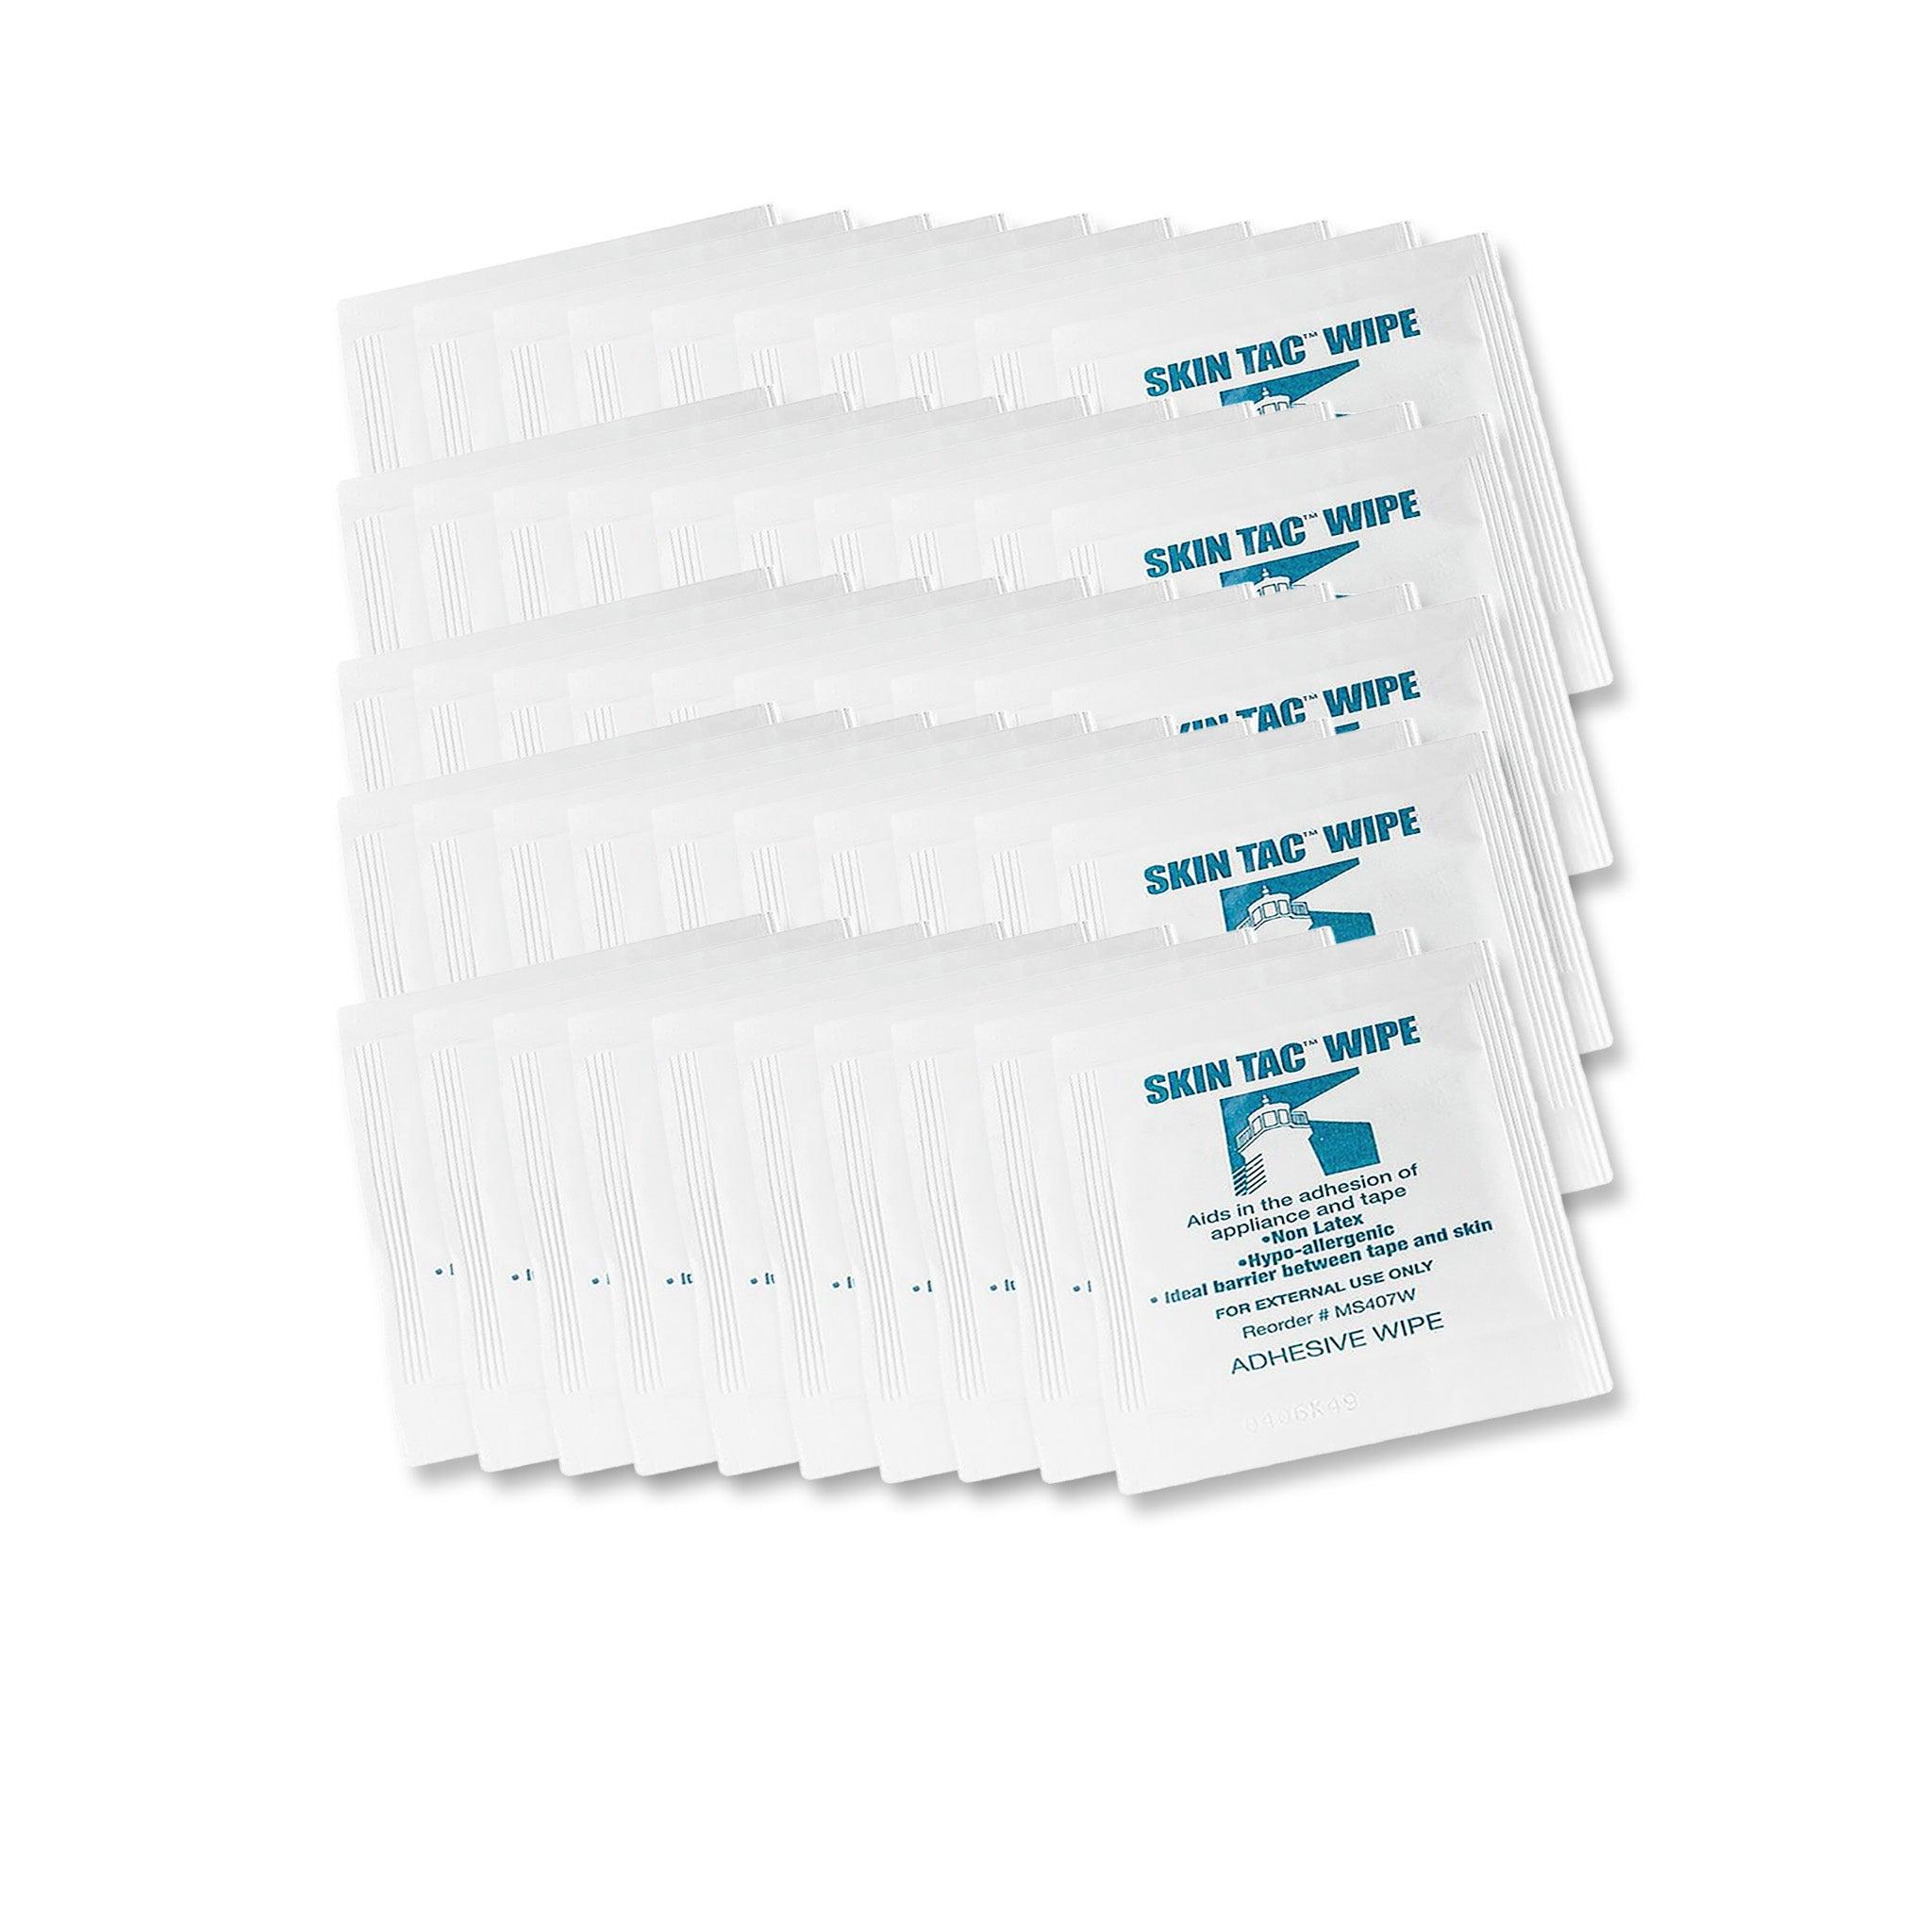 ExpressionMed Skin-Tac Adhesive Wipes